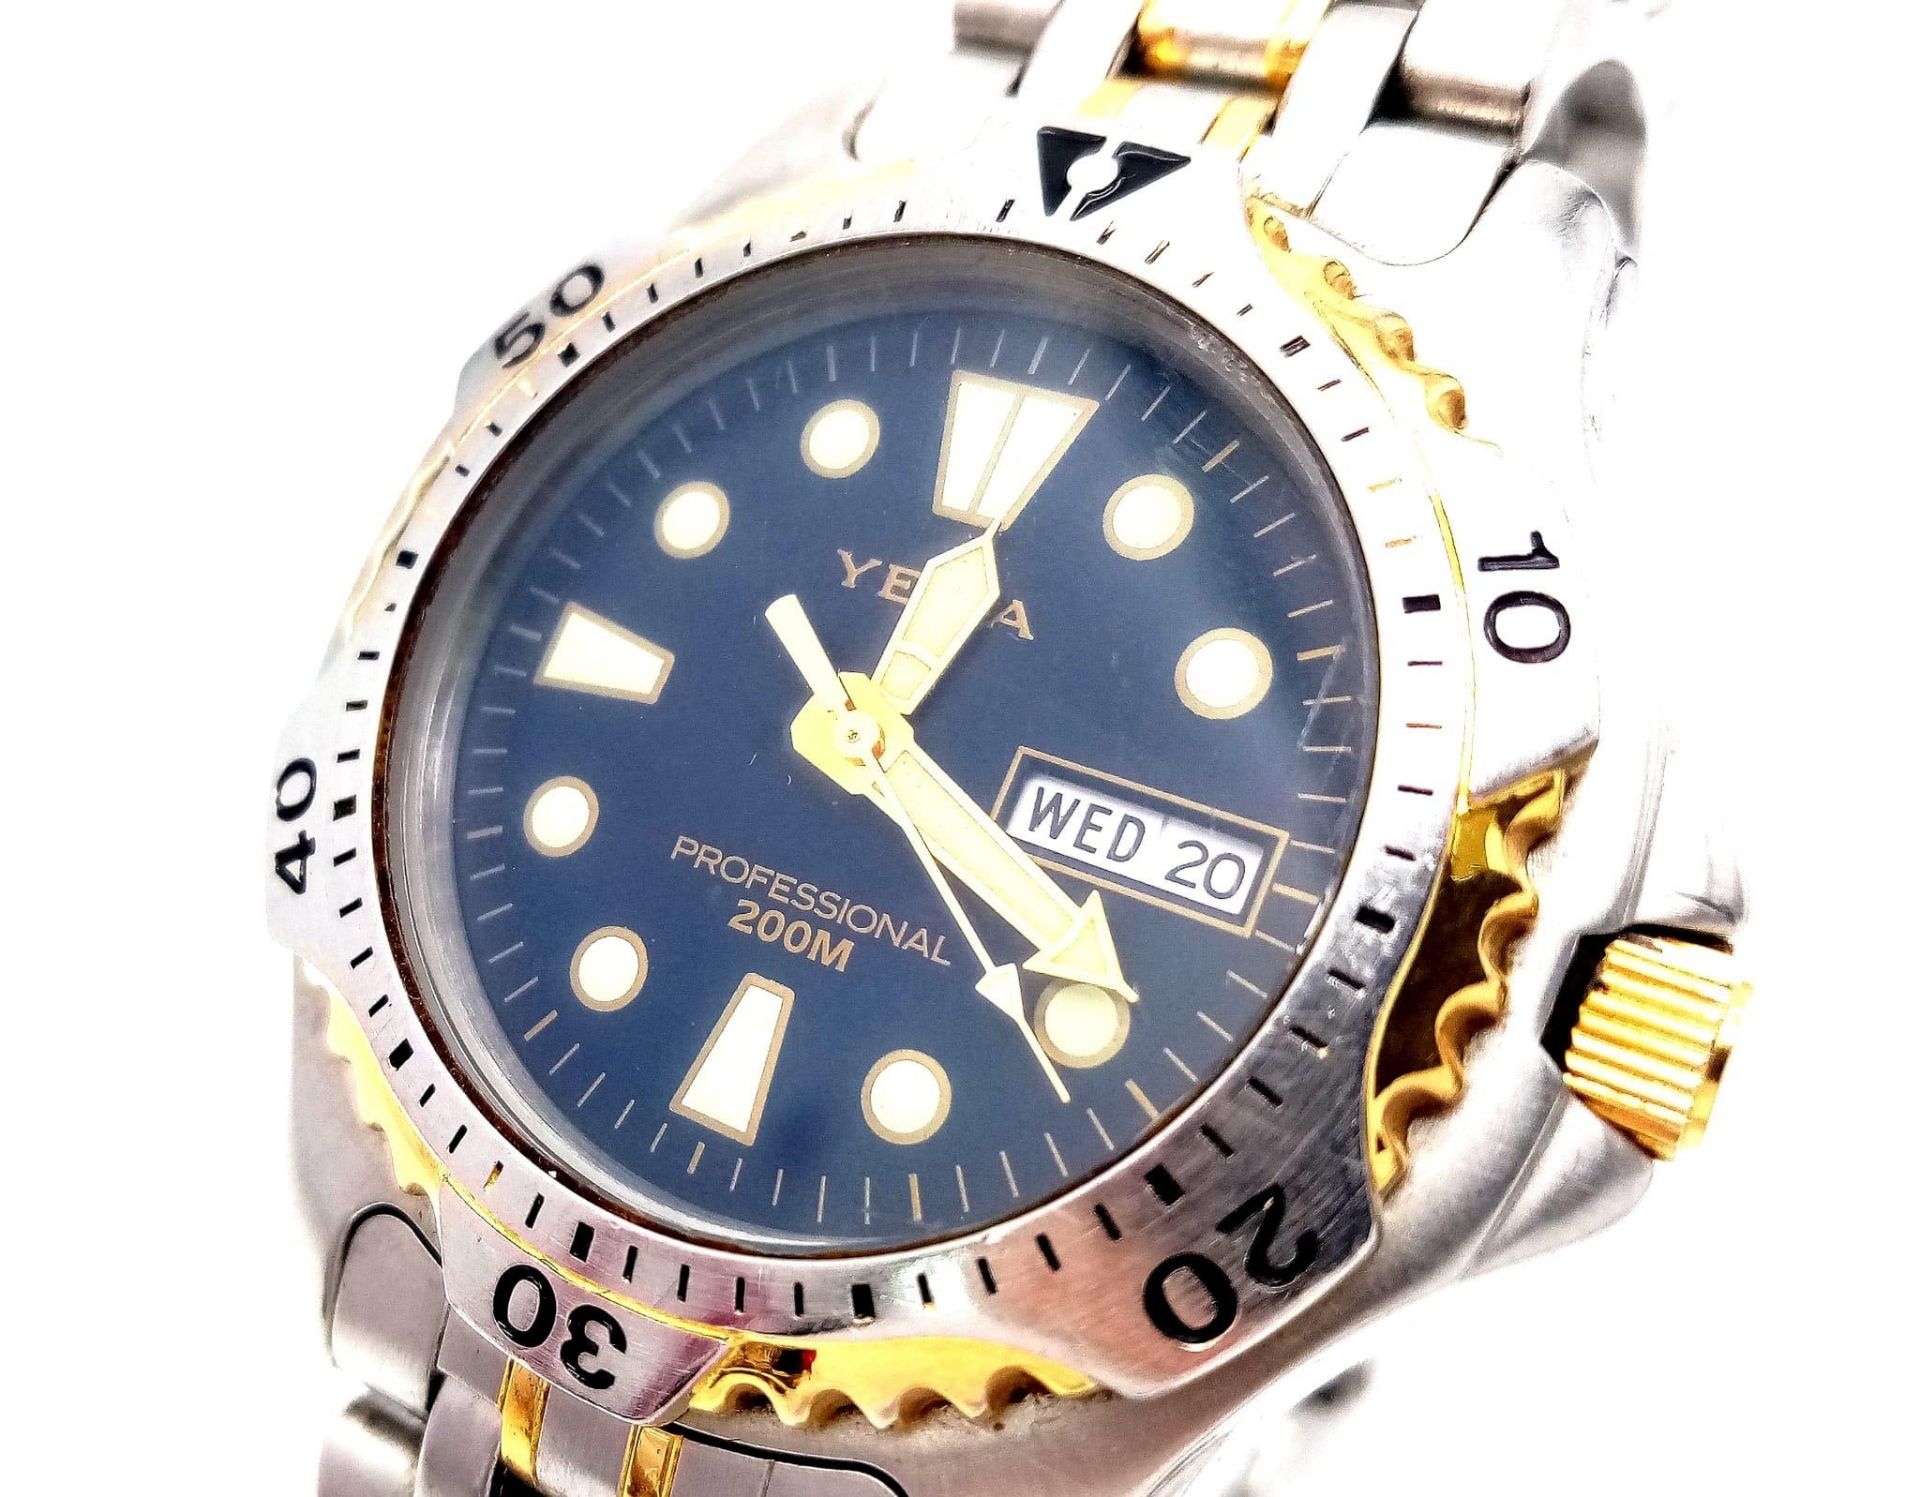 A Yema Bi-Metal Stainless Steel Professional, Day/Date, Quartz Divers Watch. 45mm Including Crown. - Image 3 of 5